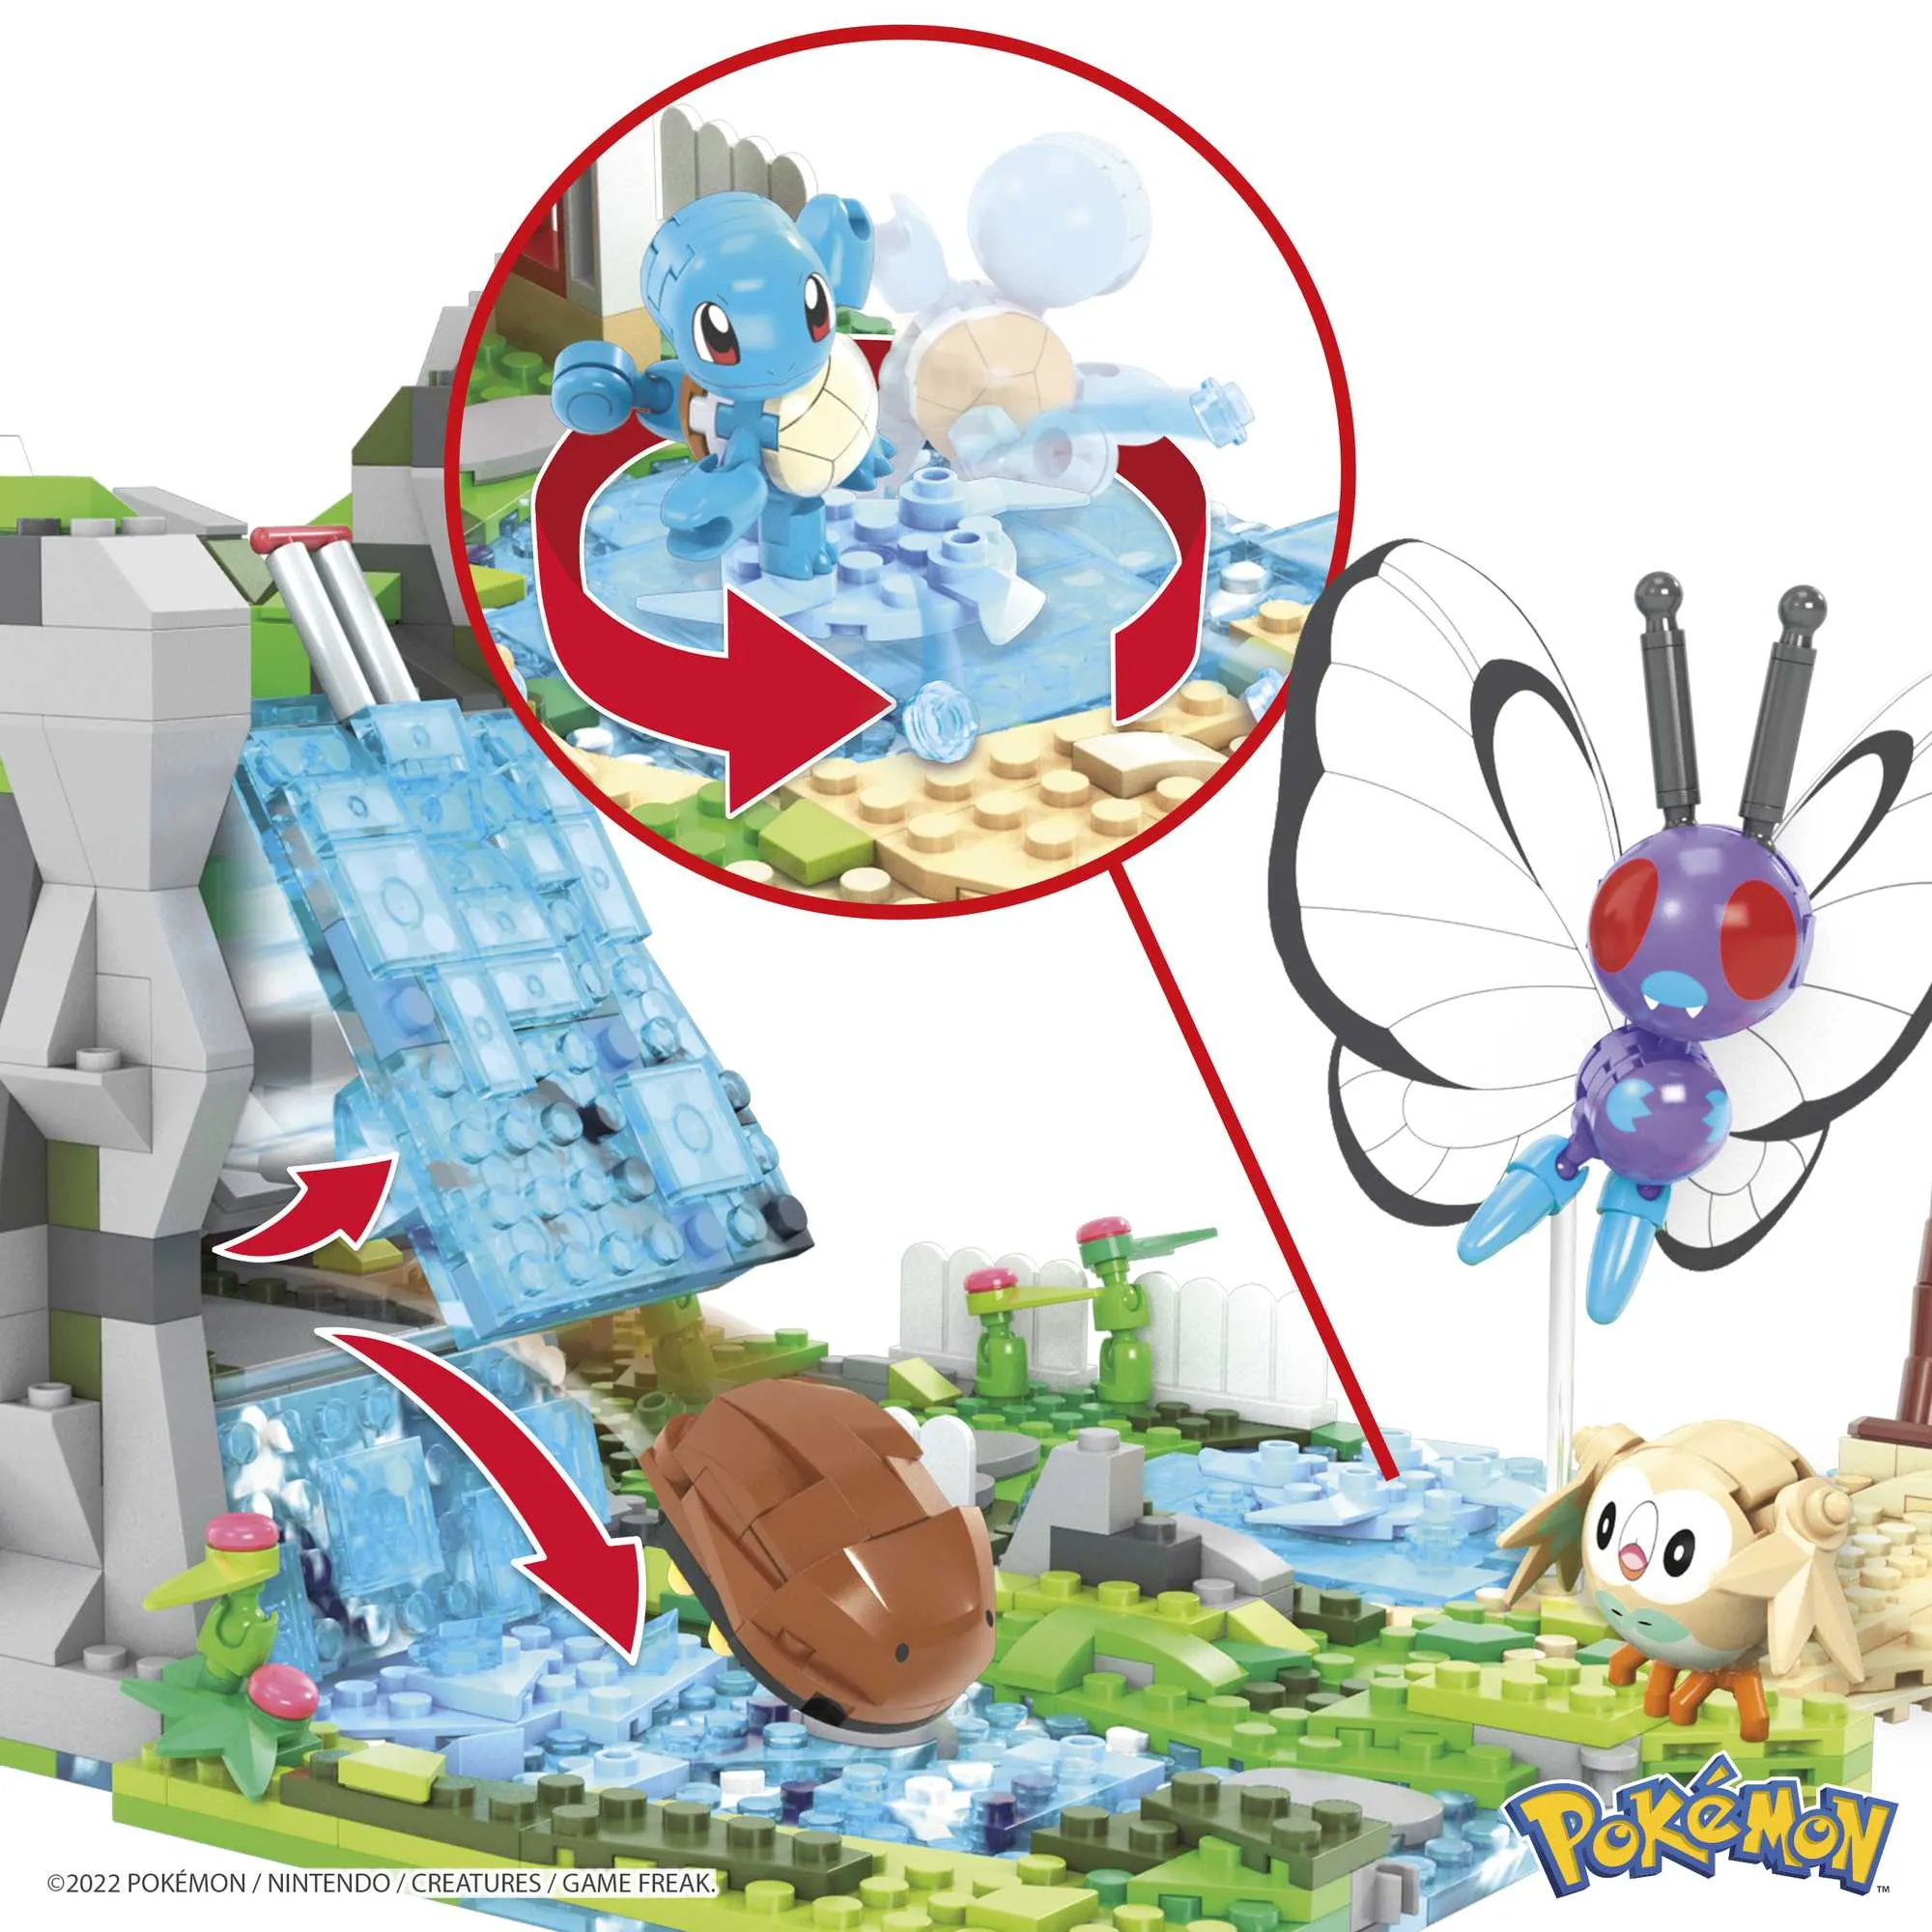 MEGA Pokemon Motion Butterfree with Motion Brick Building Set for